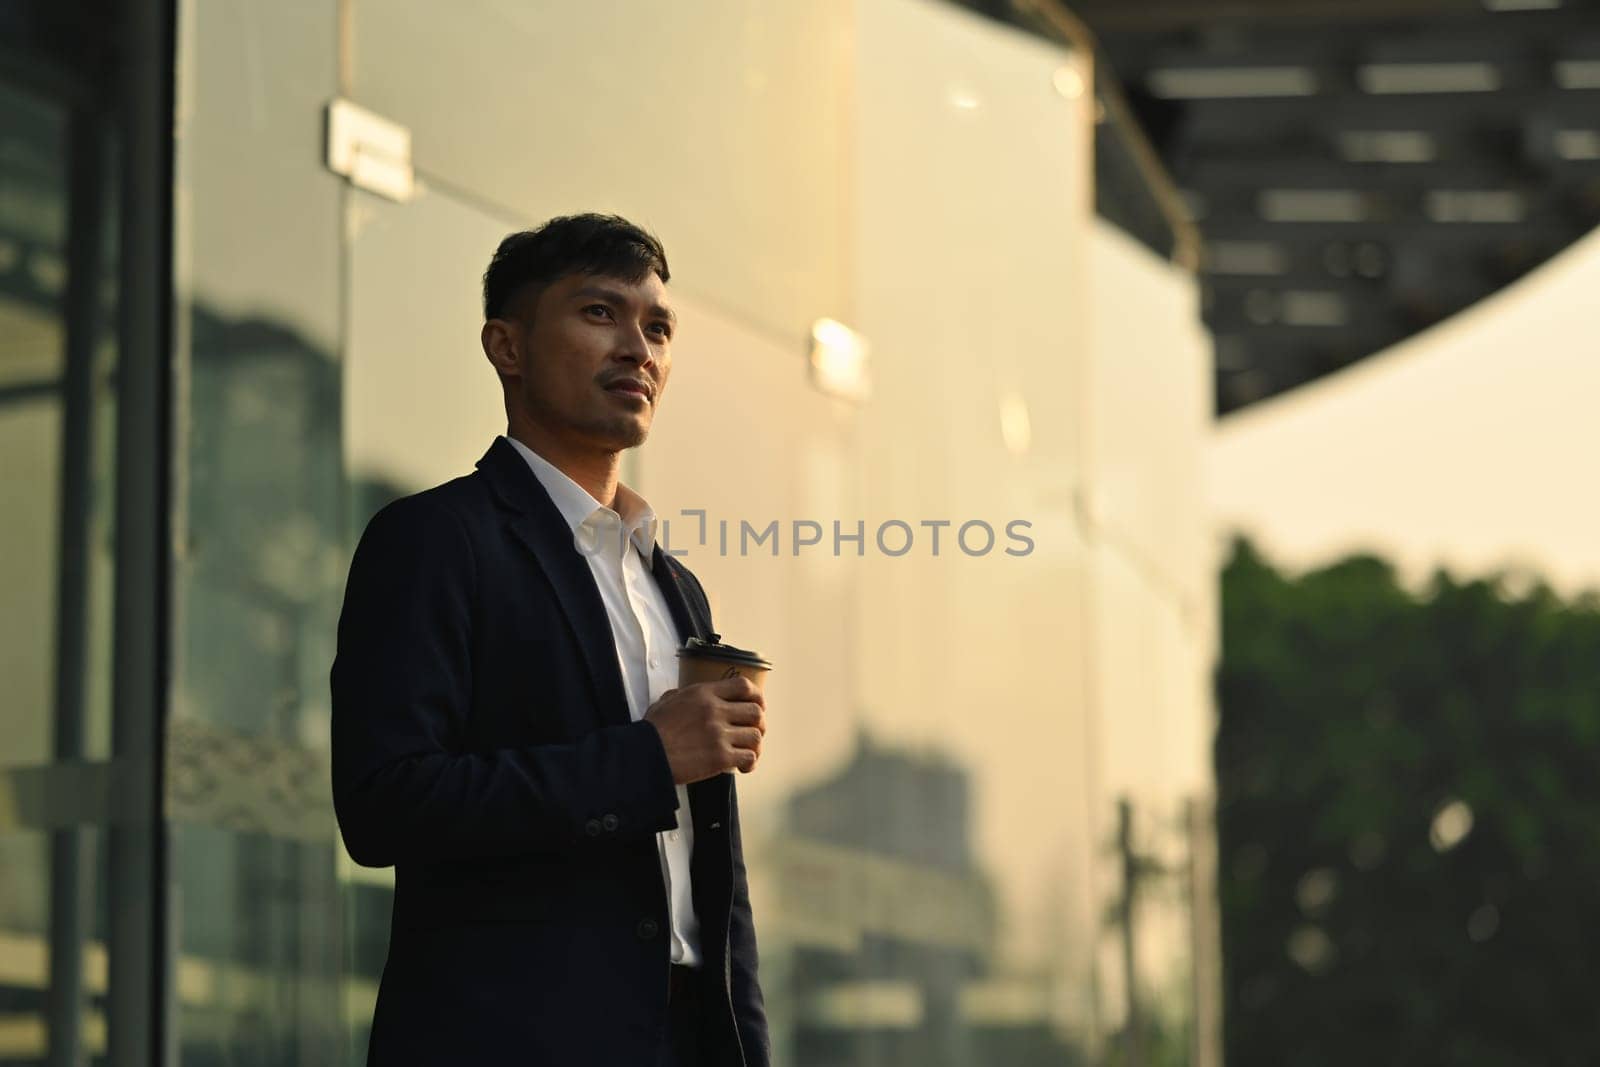 Thoughtful young businessman in formalwear standing outside building with cityscape background in early morning.